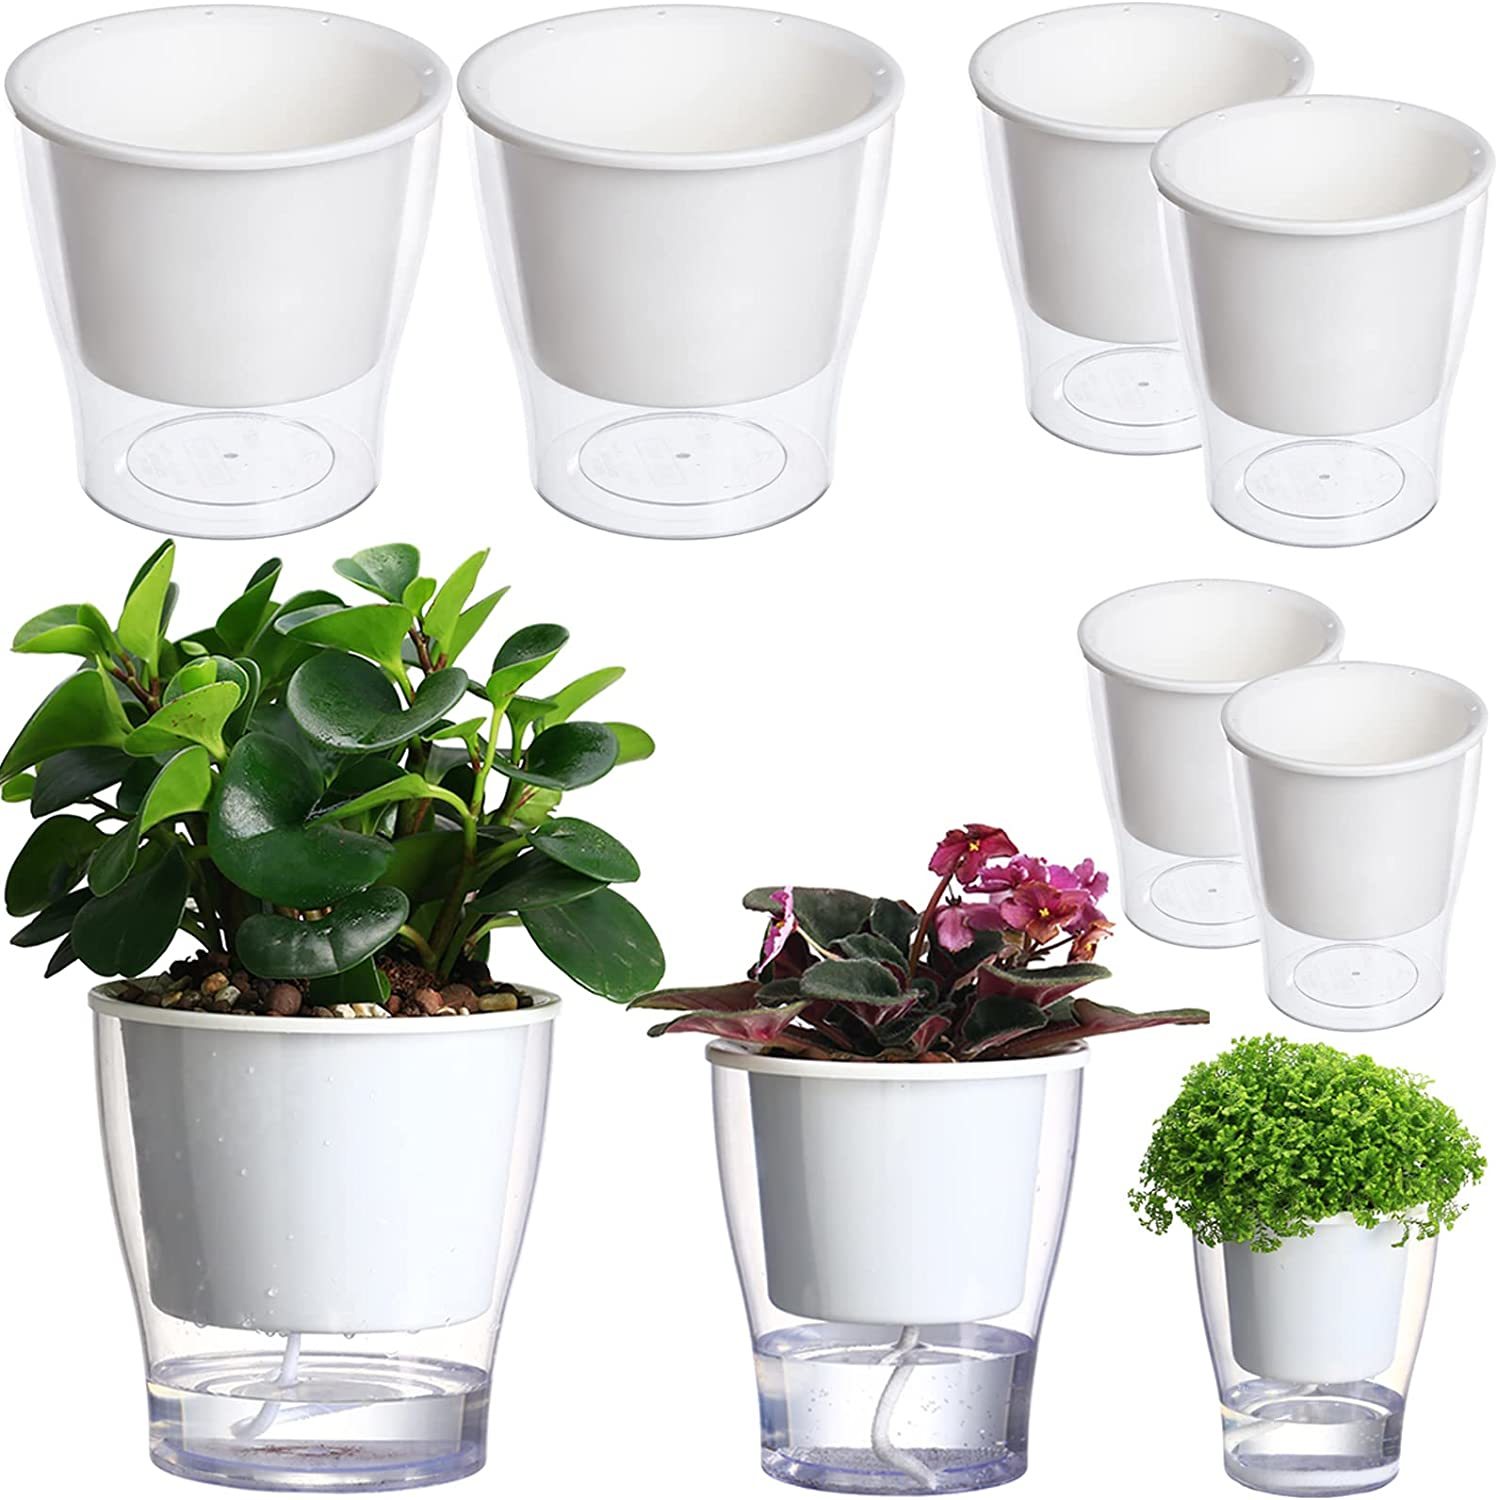 6 Pakcs Self-Watering Planters For Indoor Plants In Large, Medium,, 3 Inches). - $35.92